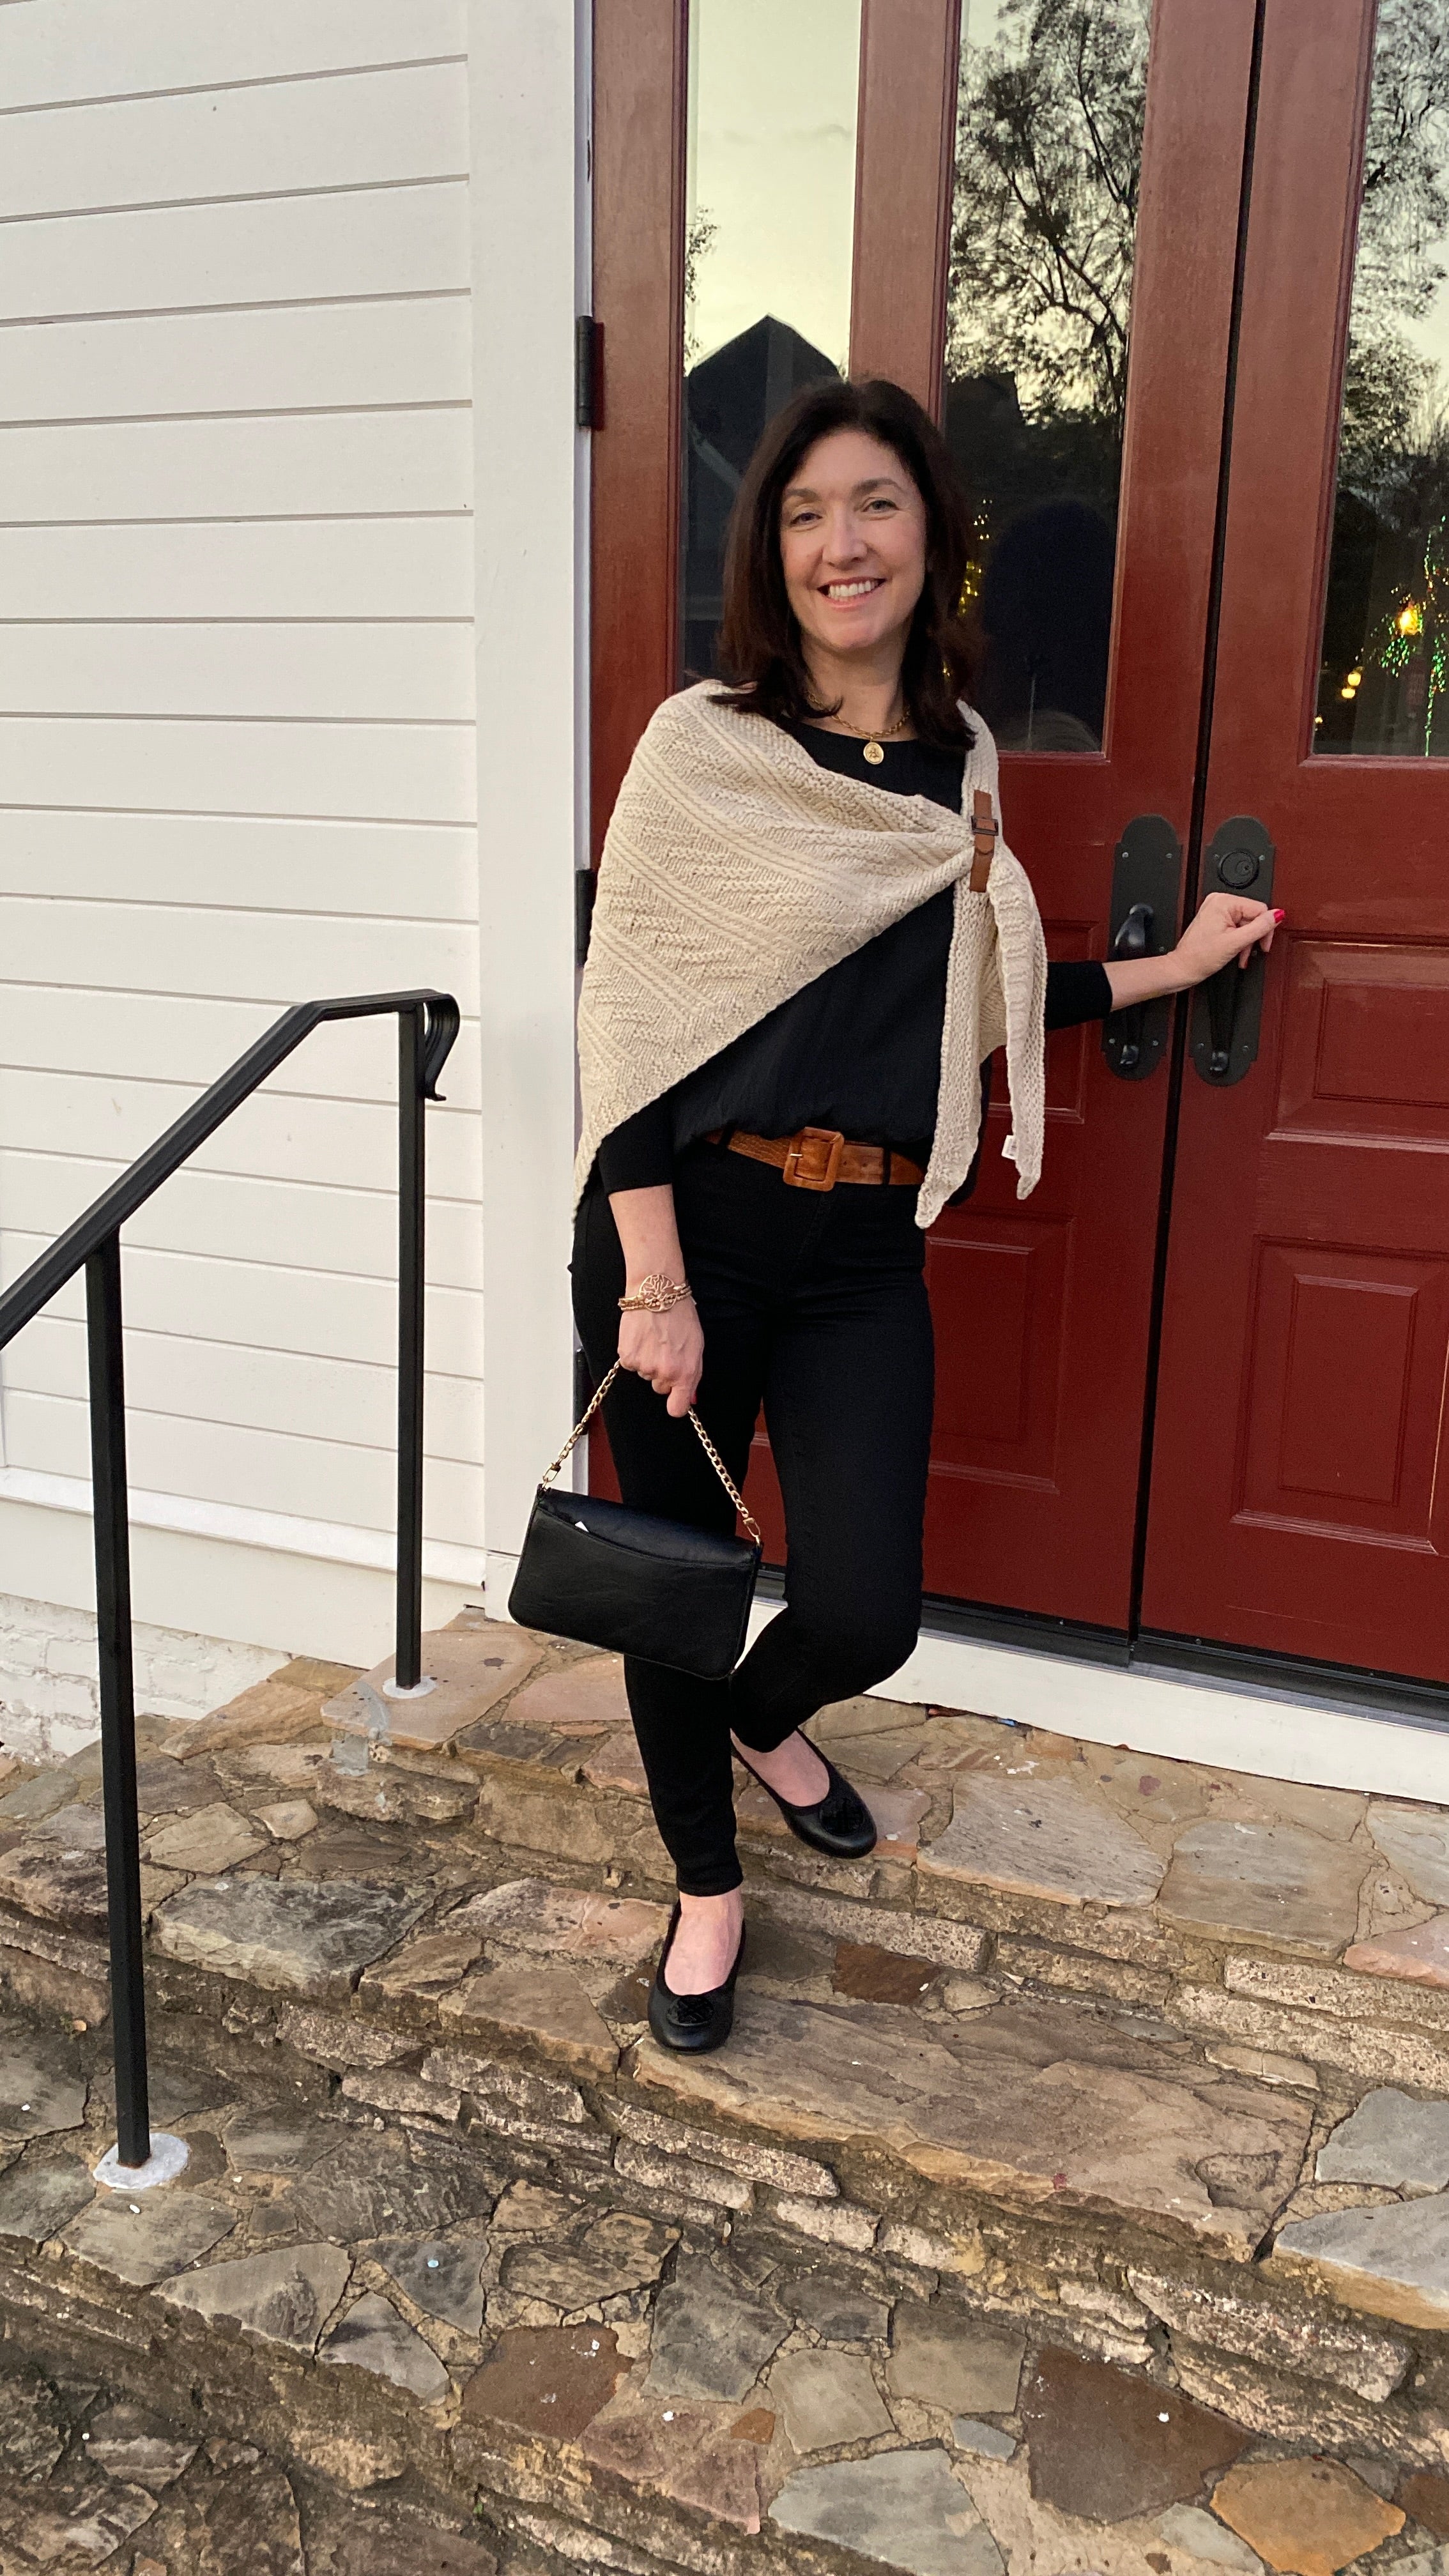 For a light but extra layer of warmth, you will love this cable knit shawl - it's so soft can cozy! It's a larger cable knit and comes with a strap adornment on the left, front of the shawl. It's comes in several colors to suit your style!  Material: 100% Acrylic  Care Instructions: Hand wash cold